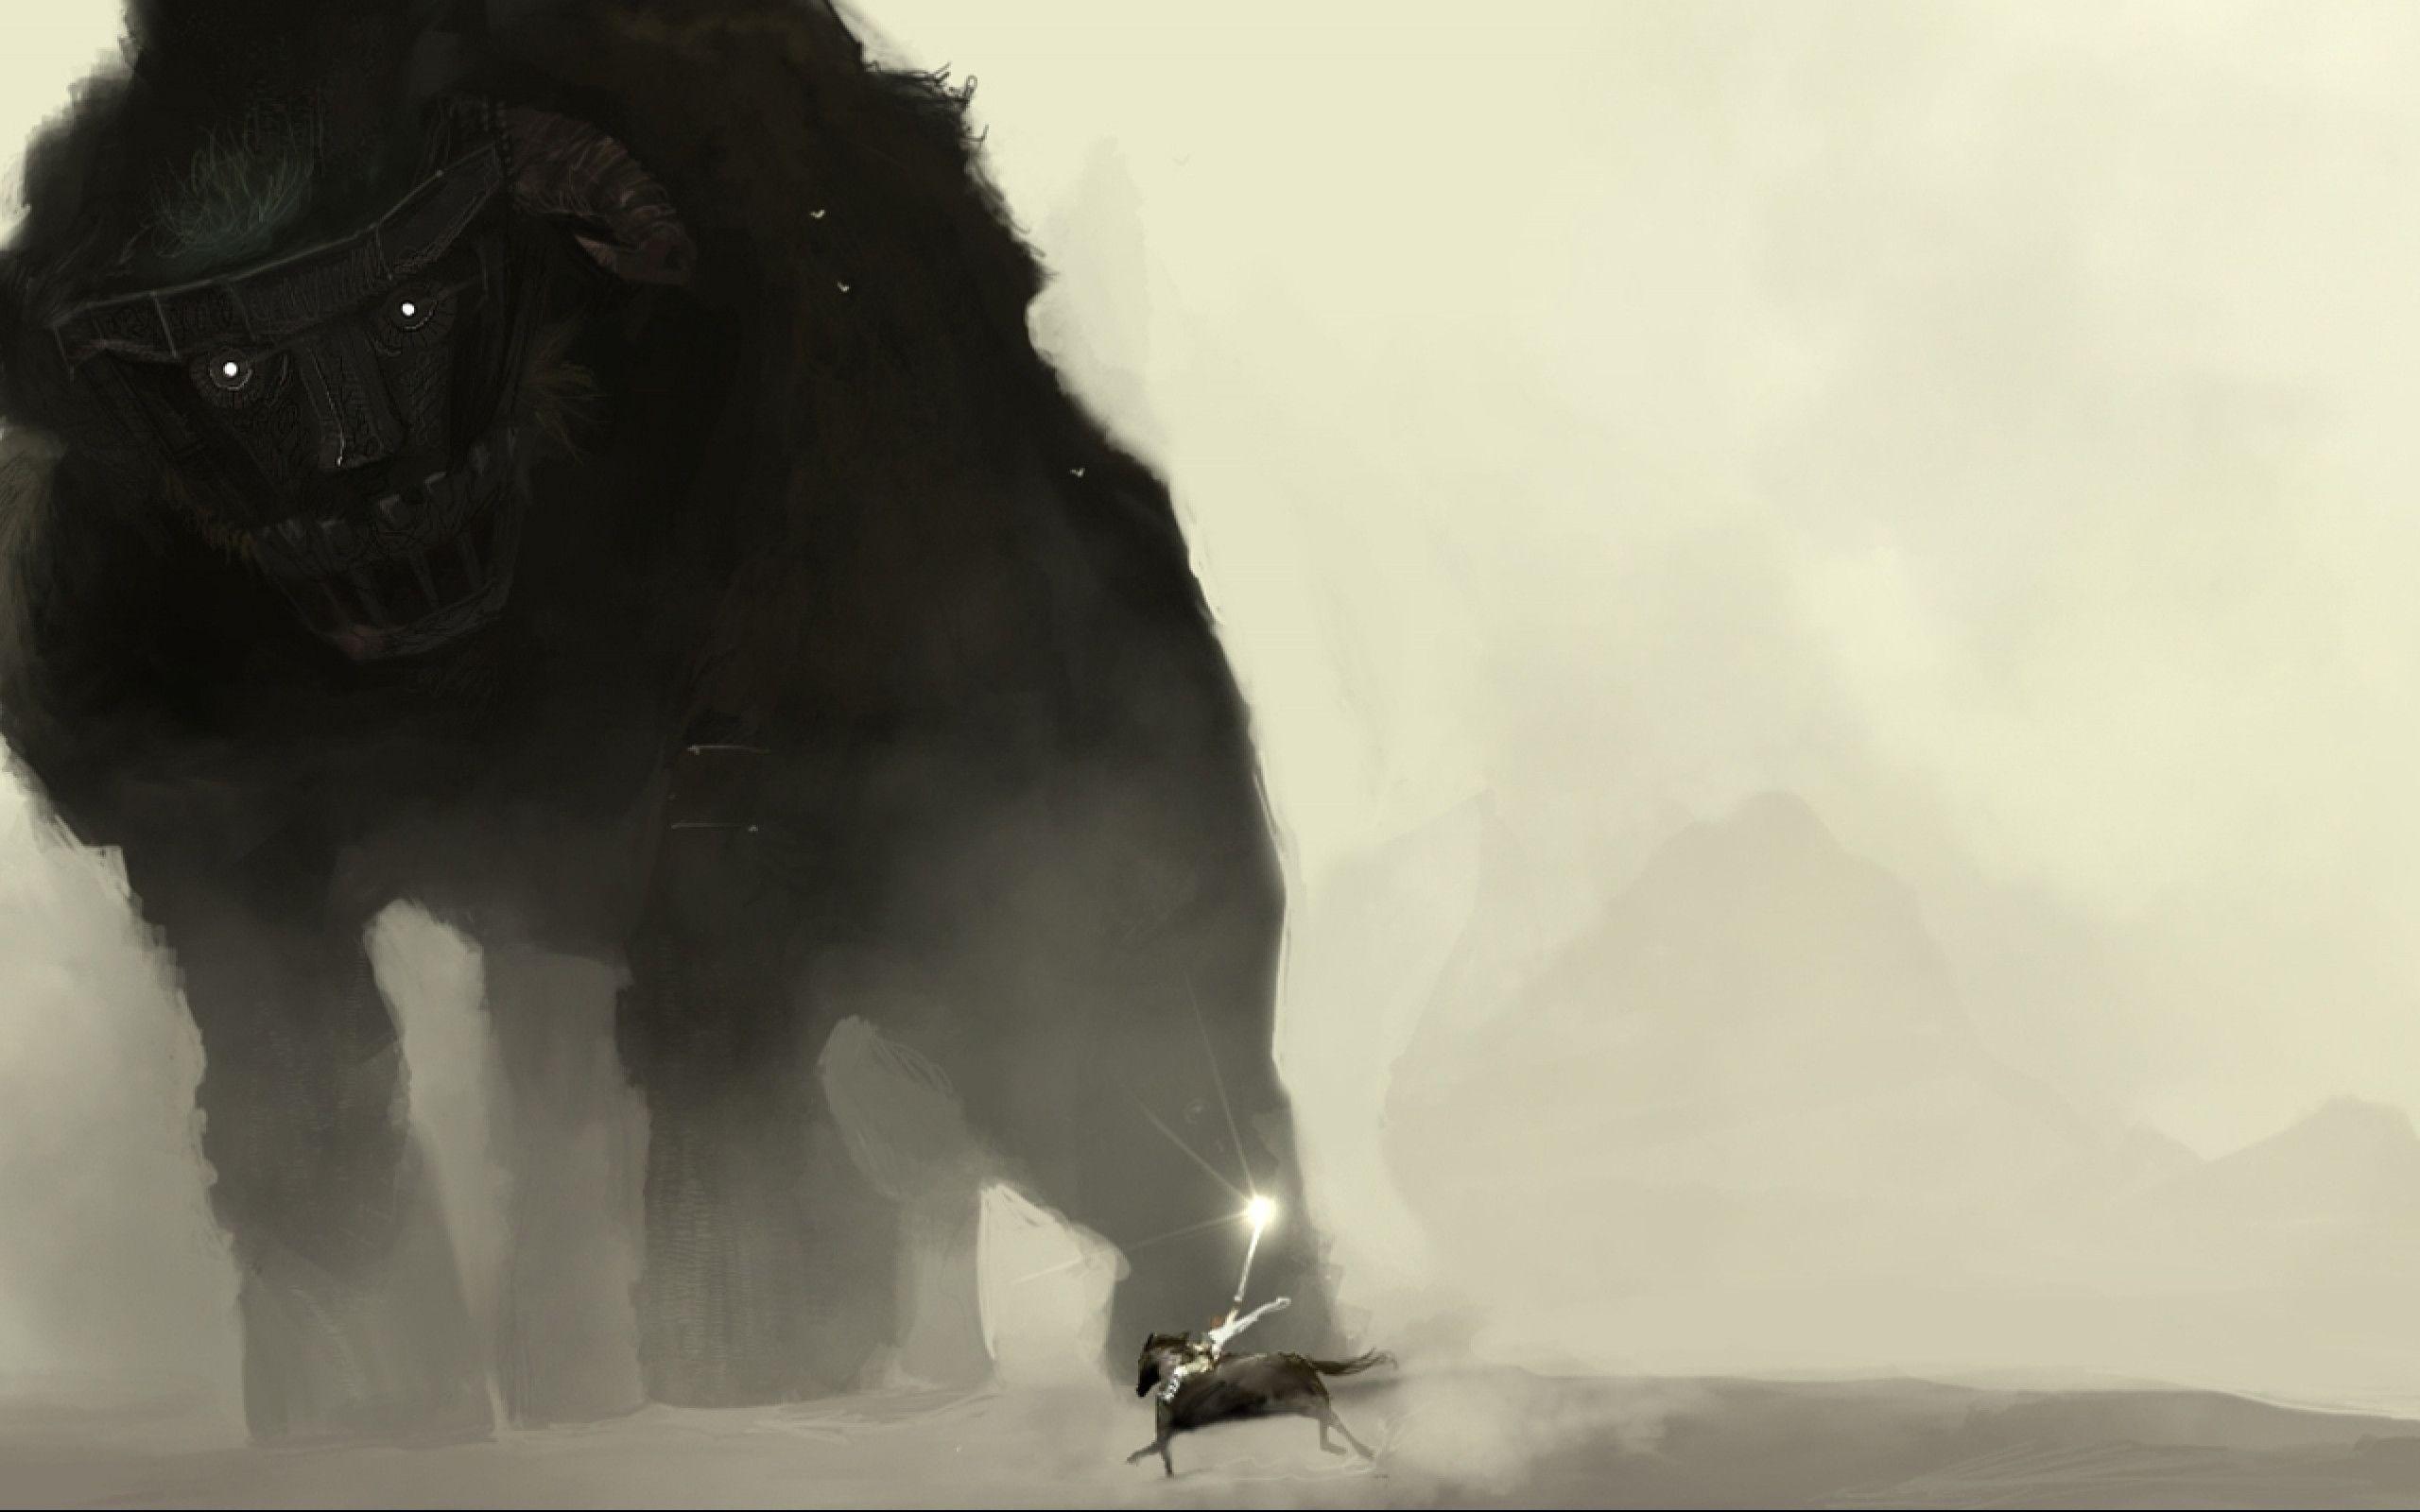 Best Wallpaper about Ico & Shadow of the Colossus